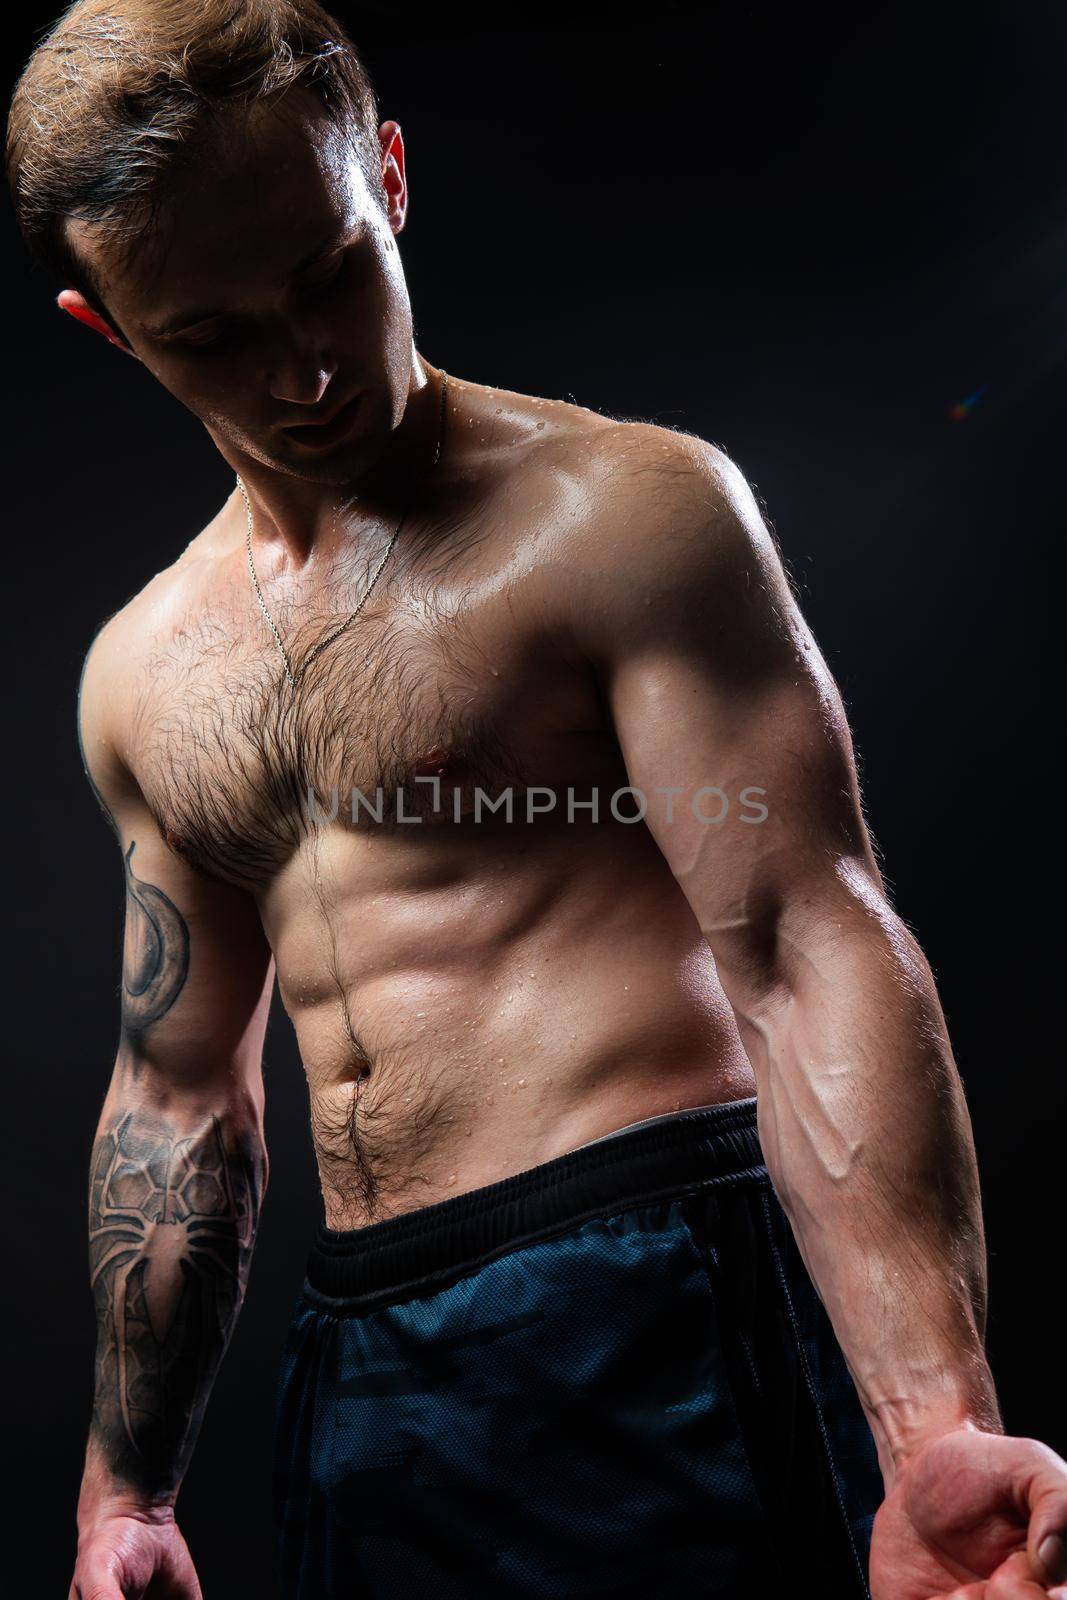 Man on black background keeps dumbbells pumped up in fitness muscle chest torso, athlete muscular workout hand, person weightlifting. Young skin adult, human fit View from the bottom up good press beautiful muscles hairy chest charisma